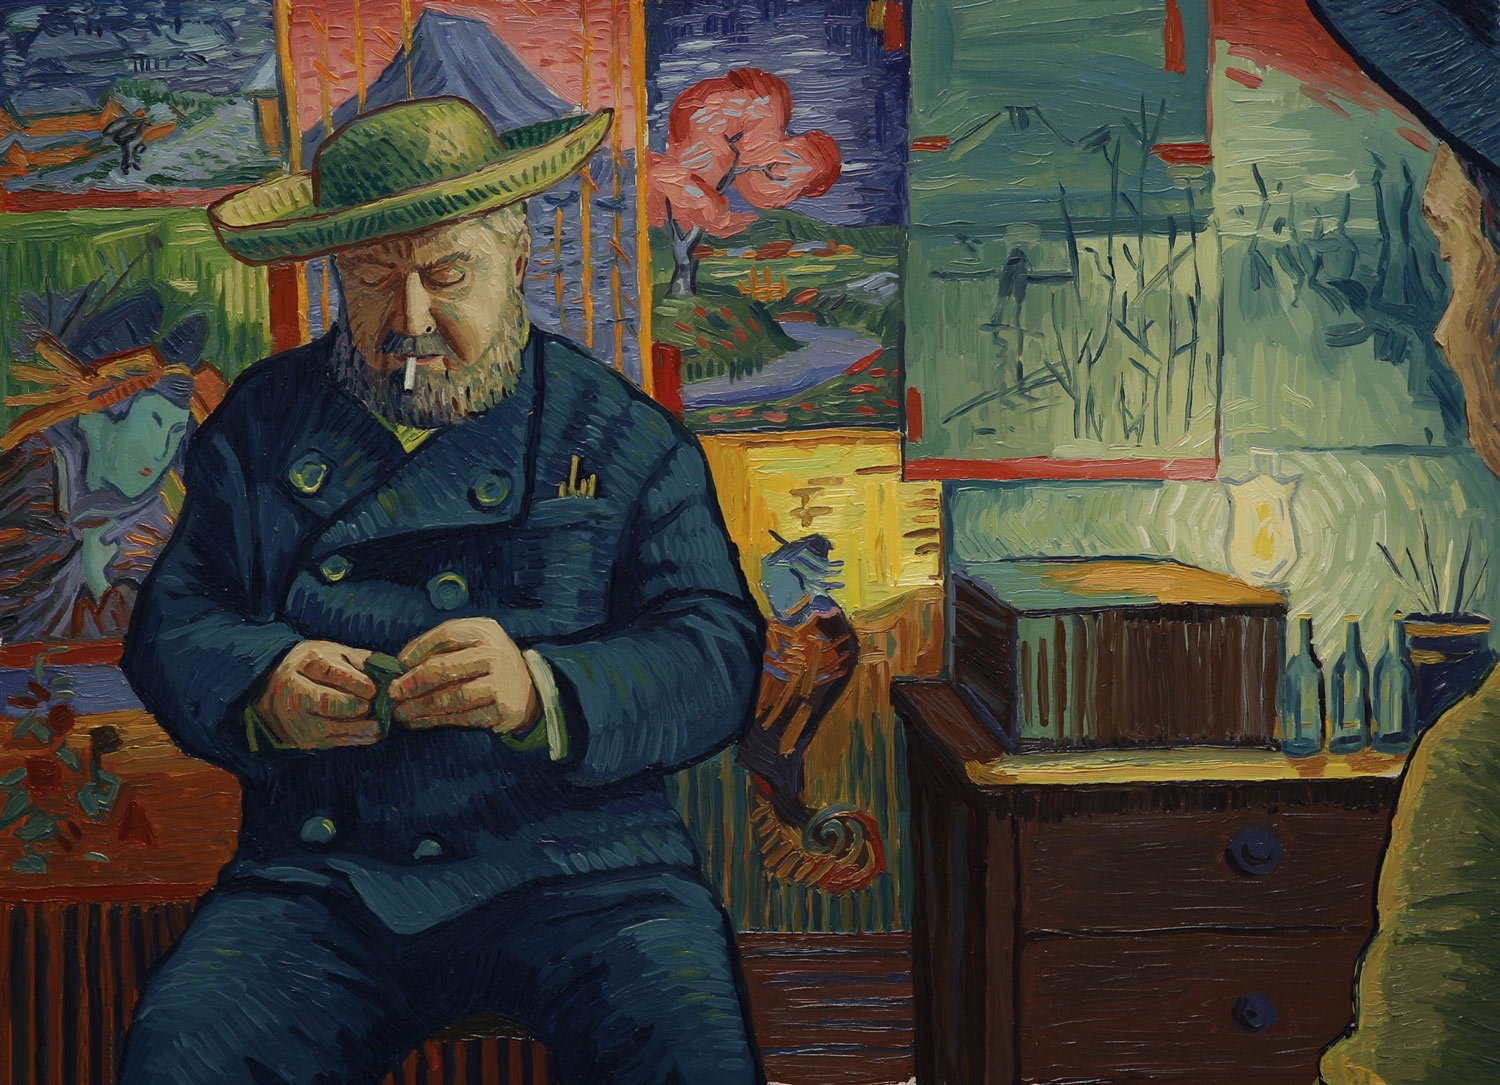 13-Animated Oil Paintings to tell the story of Loving Vincent Van Gogh